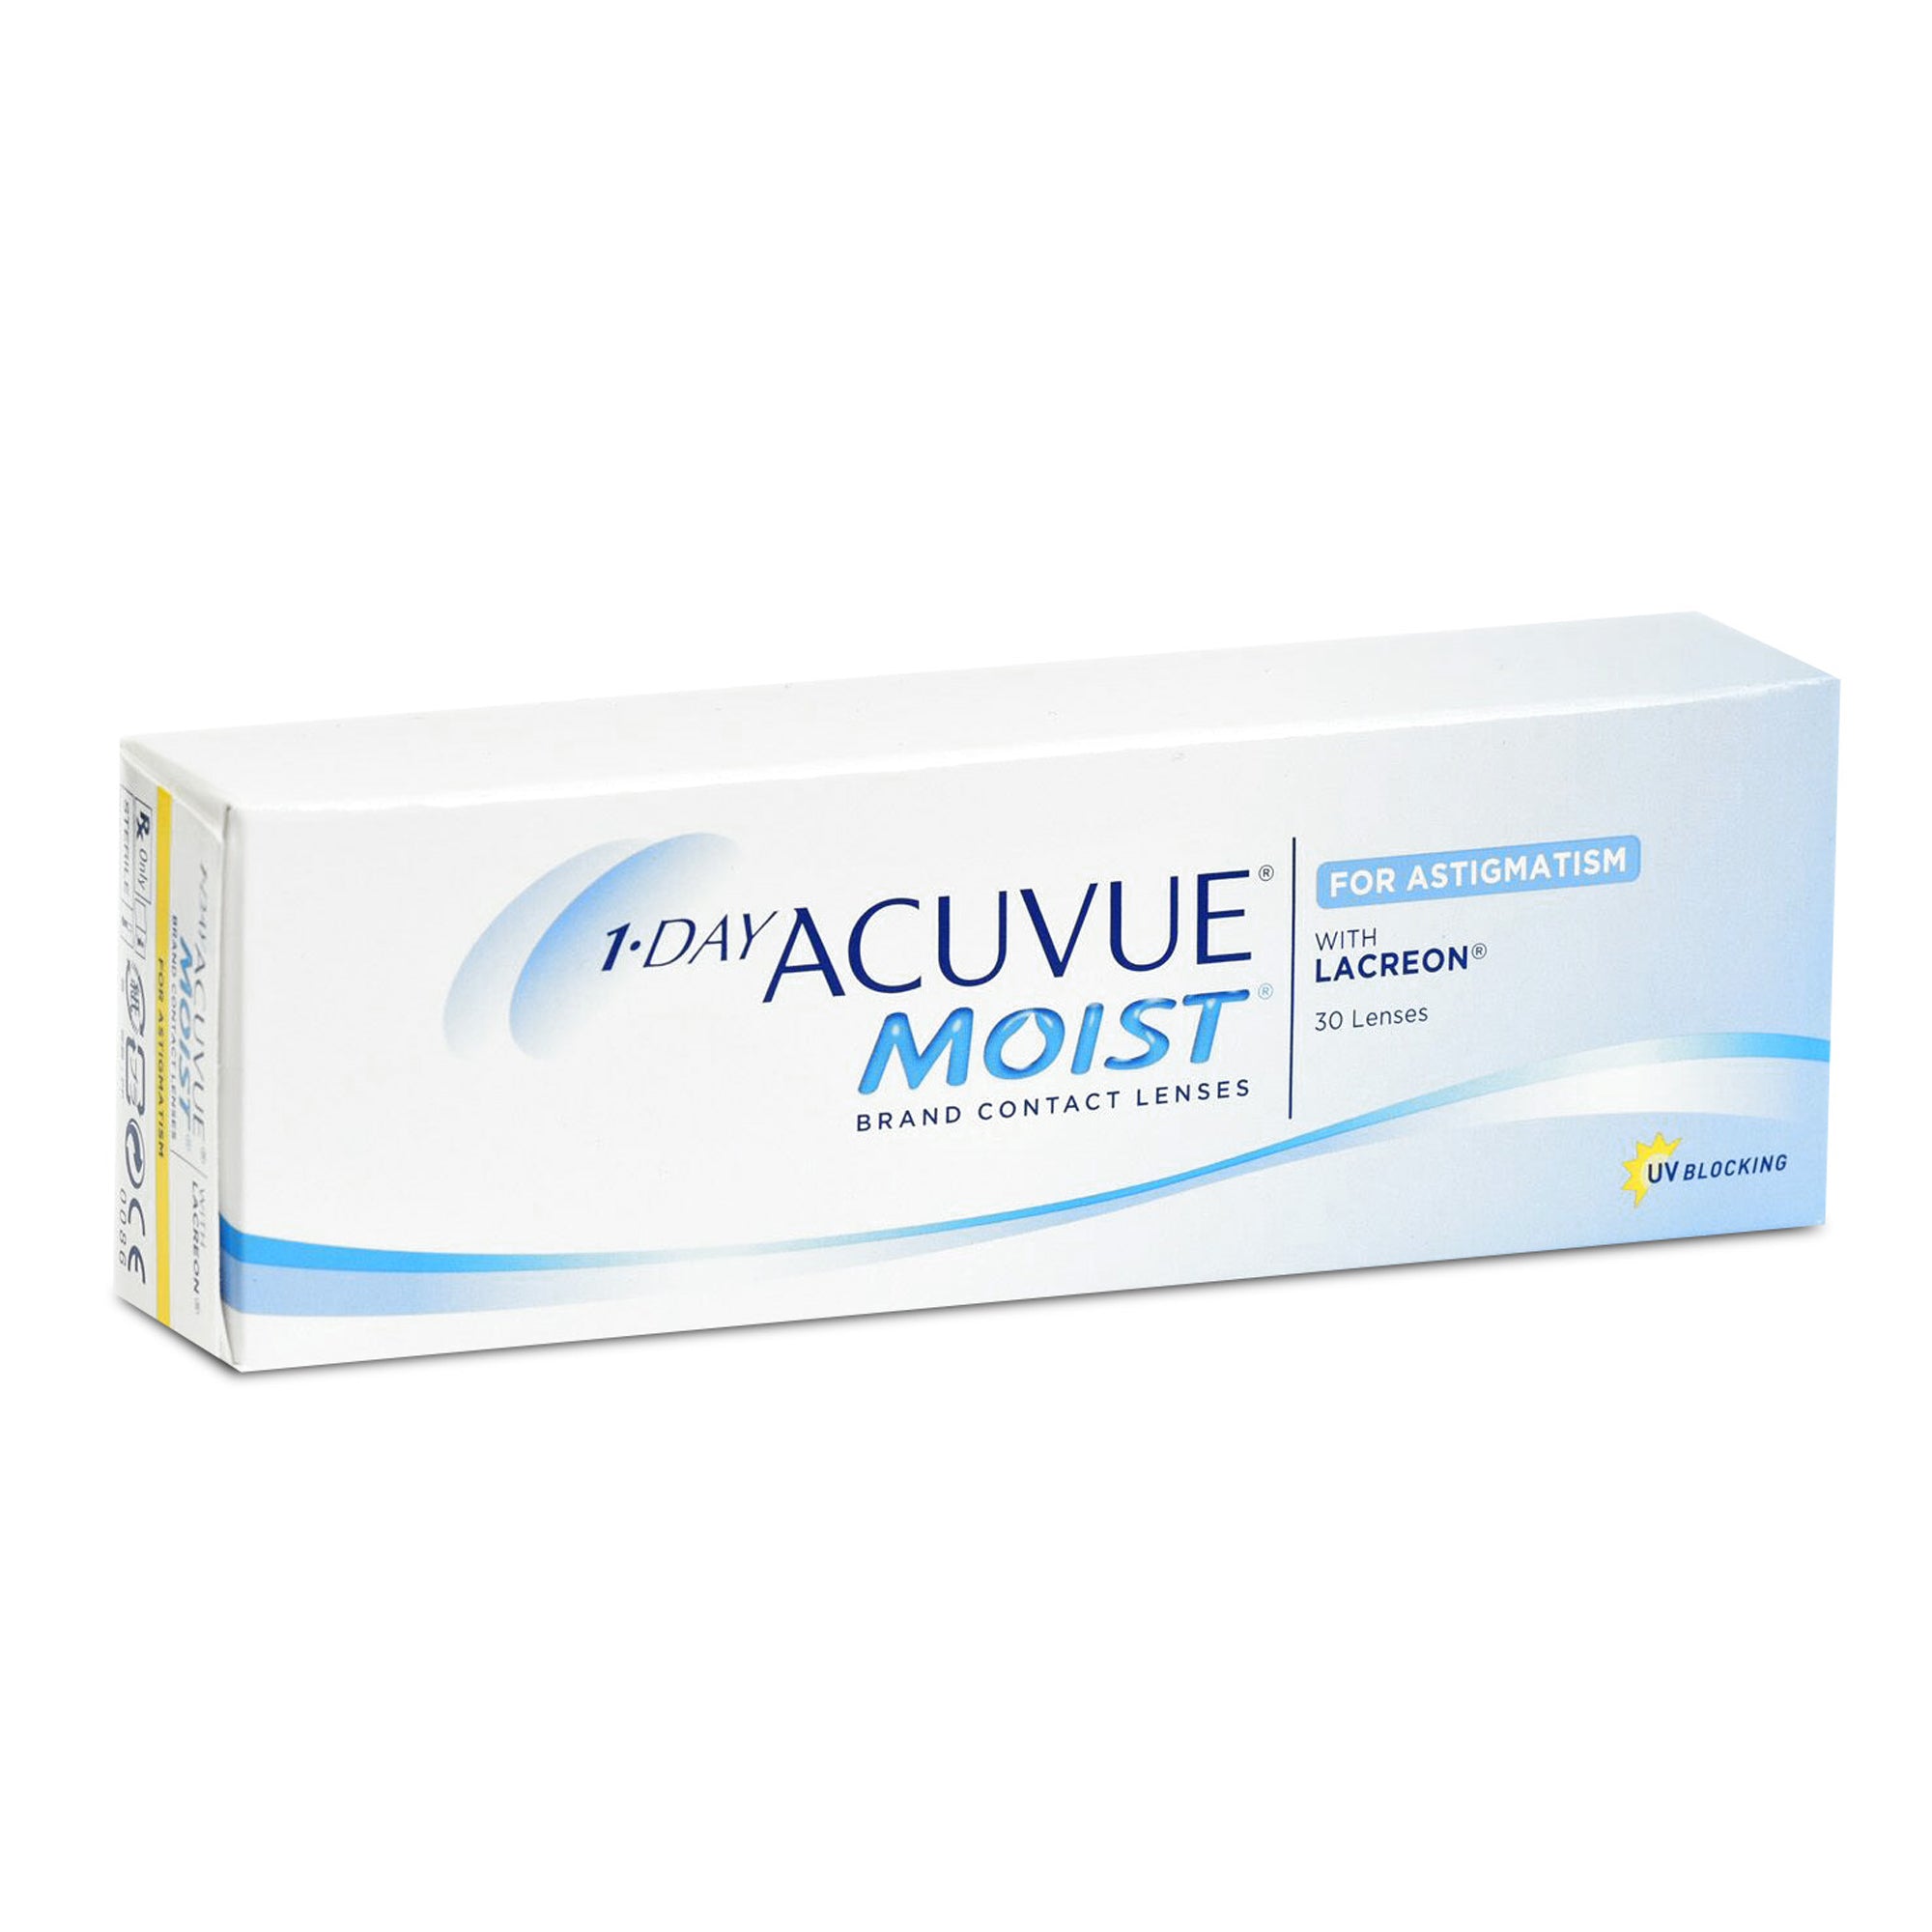 acuvue-1-day-moist-astigmatism-daily-30-pack-contact-lenses-bupa